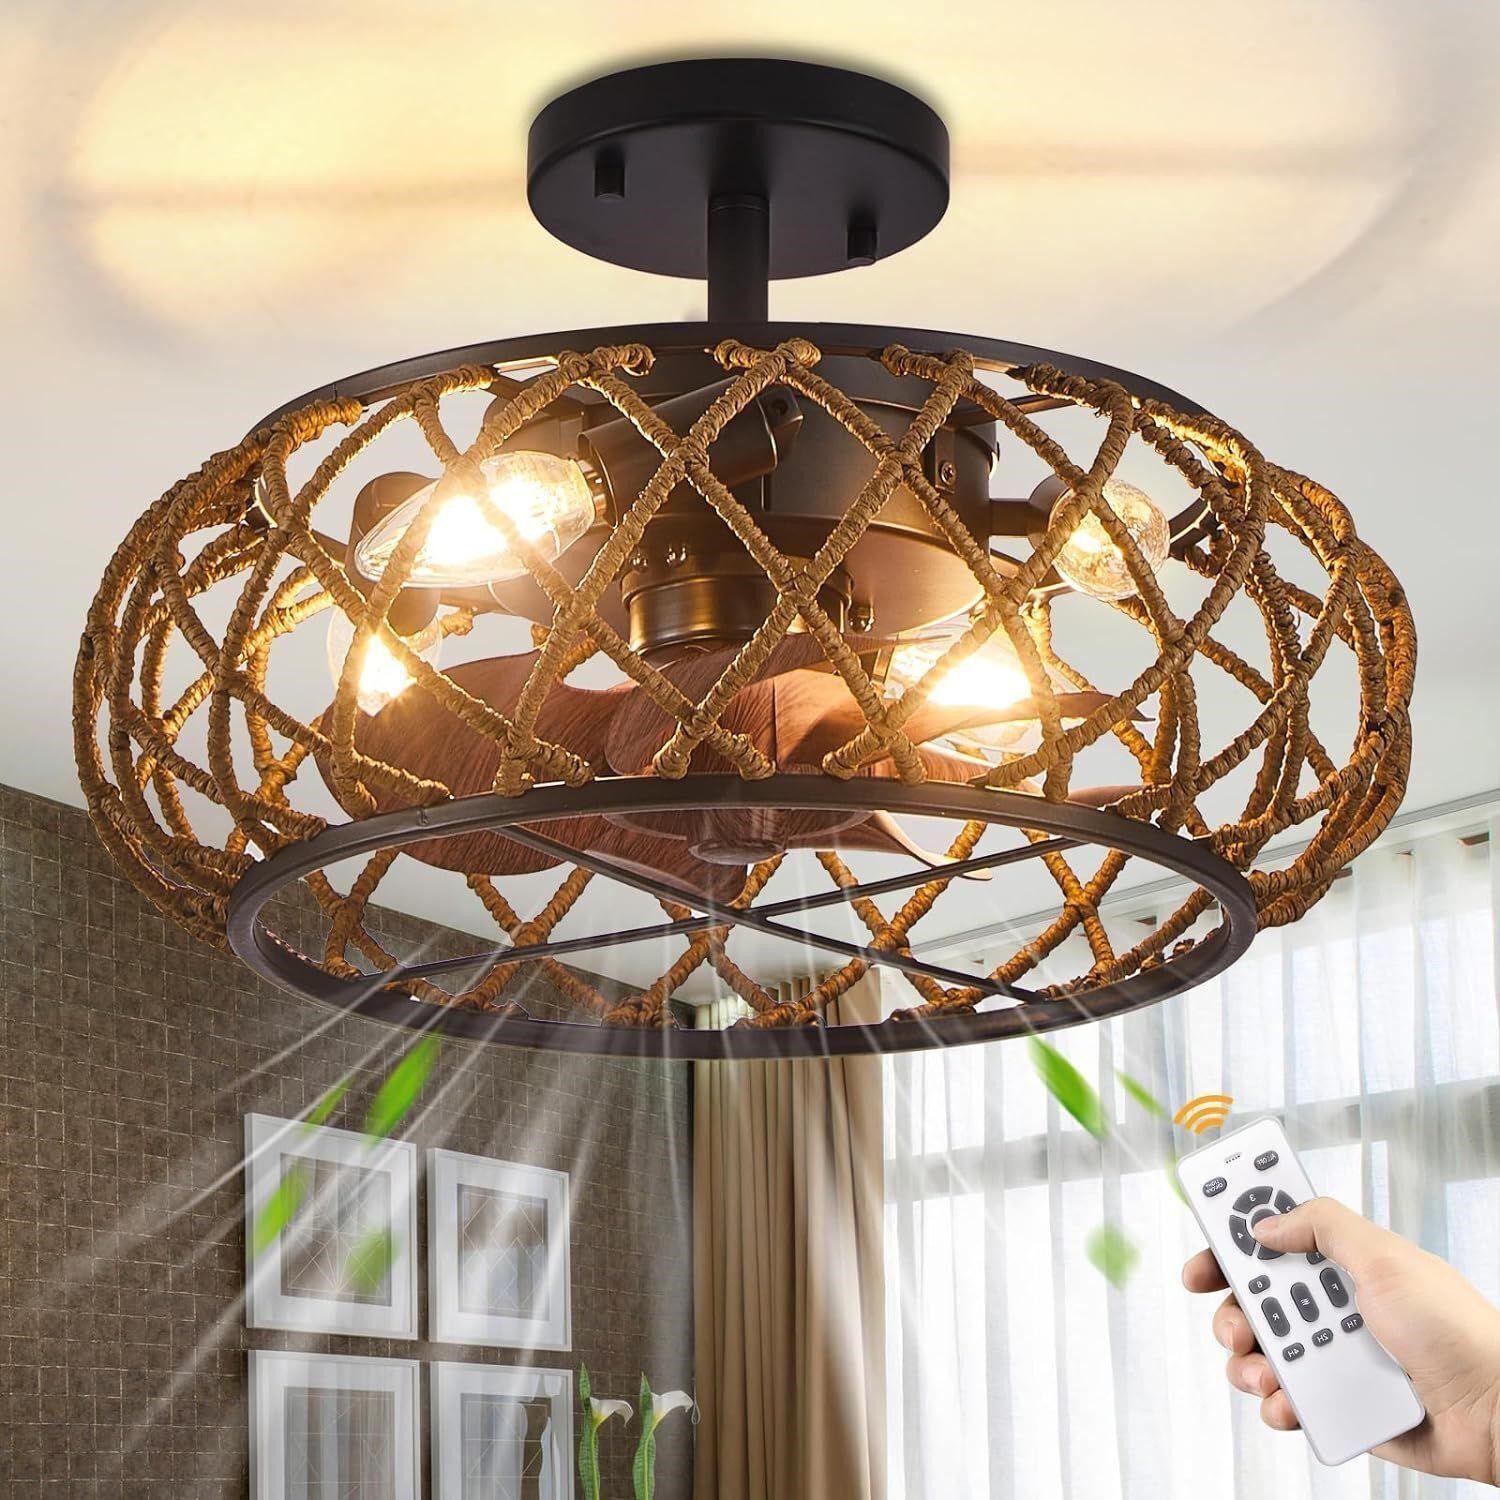 Caged Ceiling Fans with Lights Remote Control